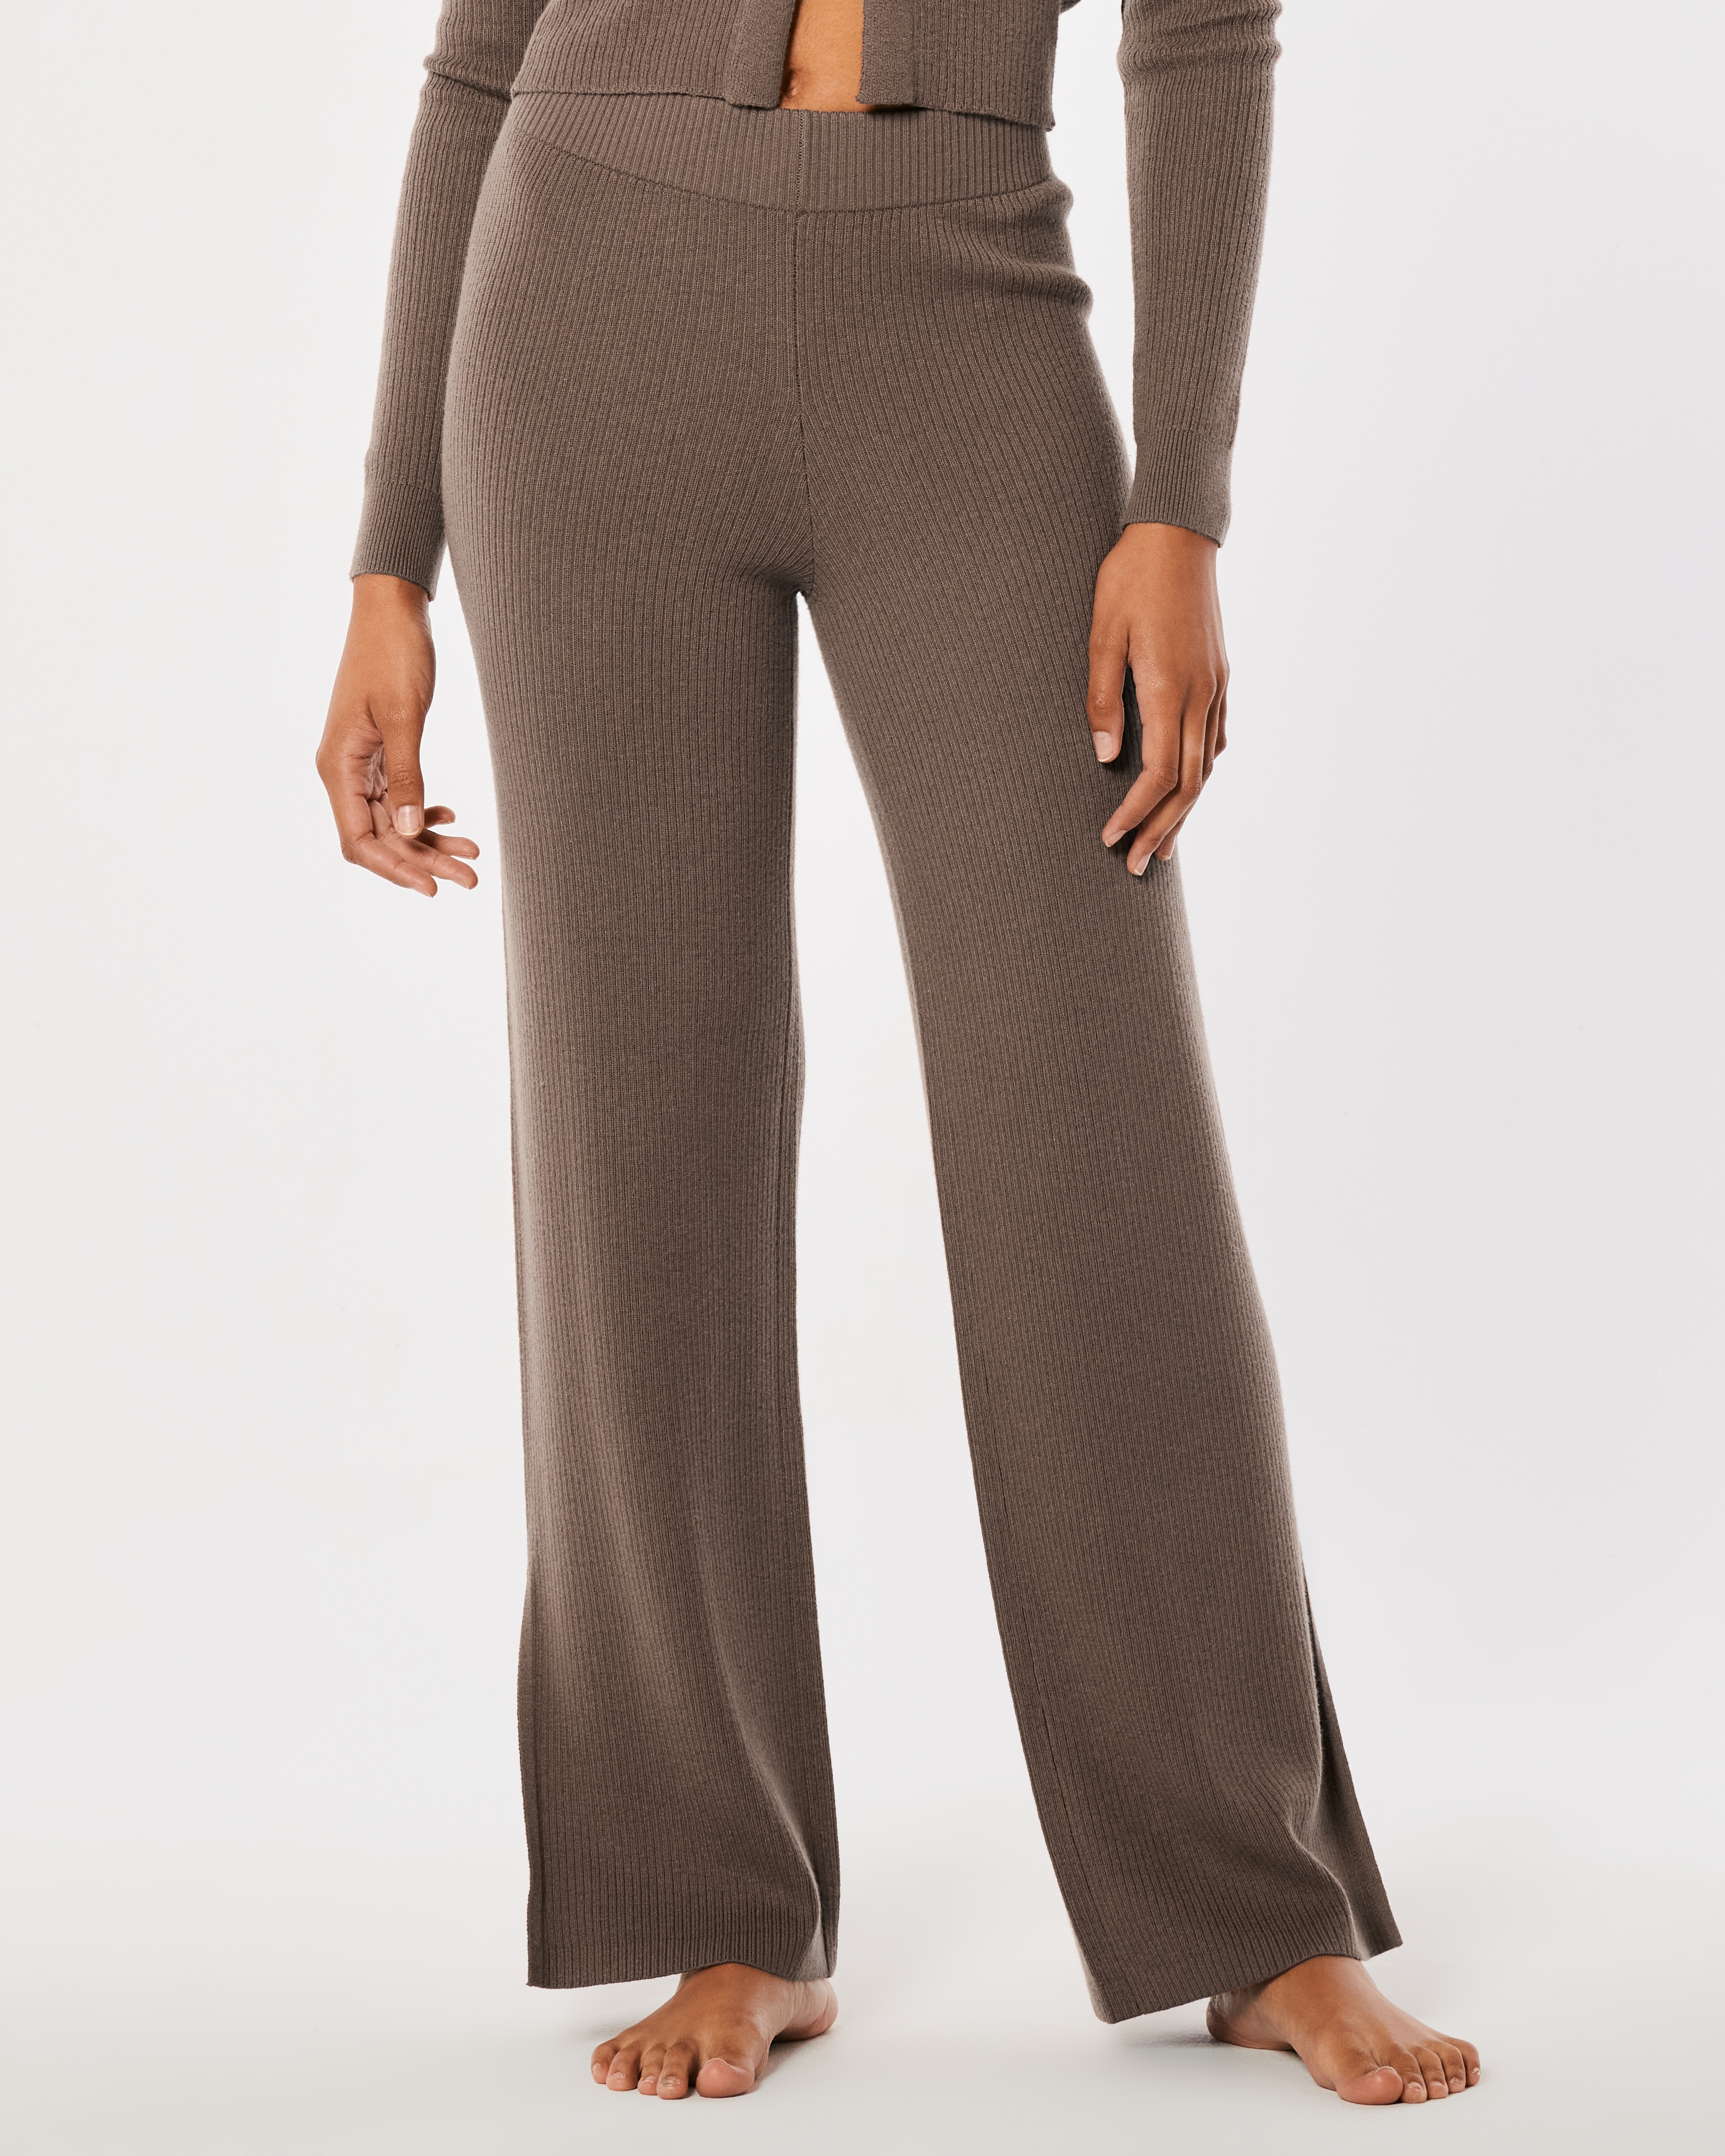 Women's Gilly Hicks Sweater-Knit Flare Pants, Women's Bottoms